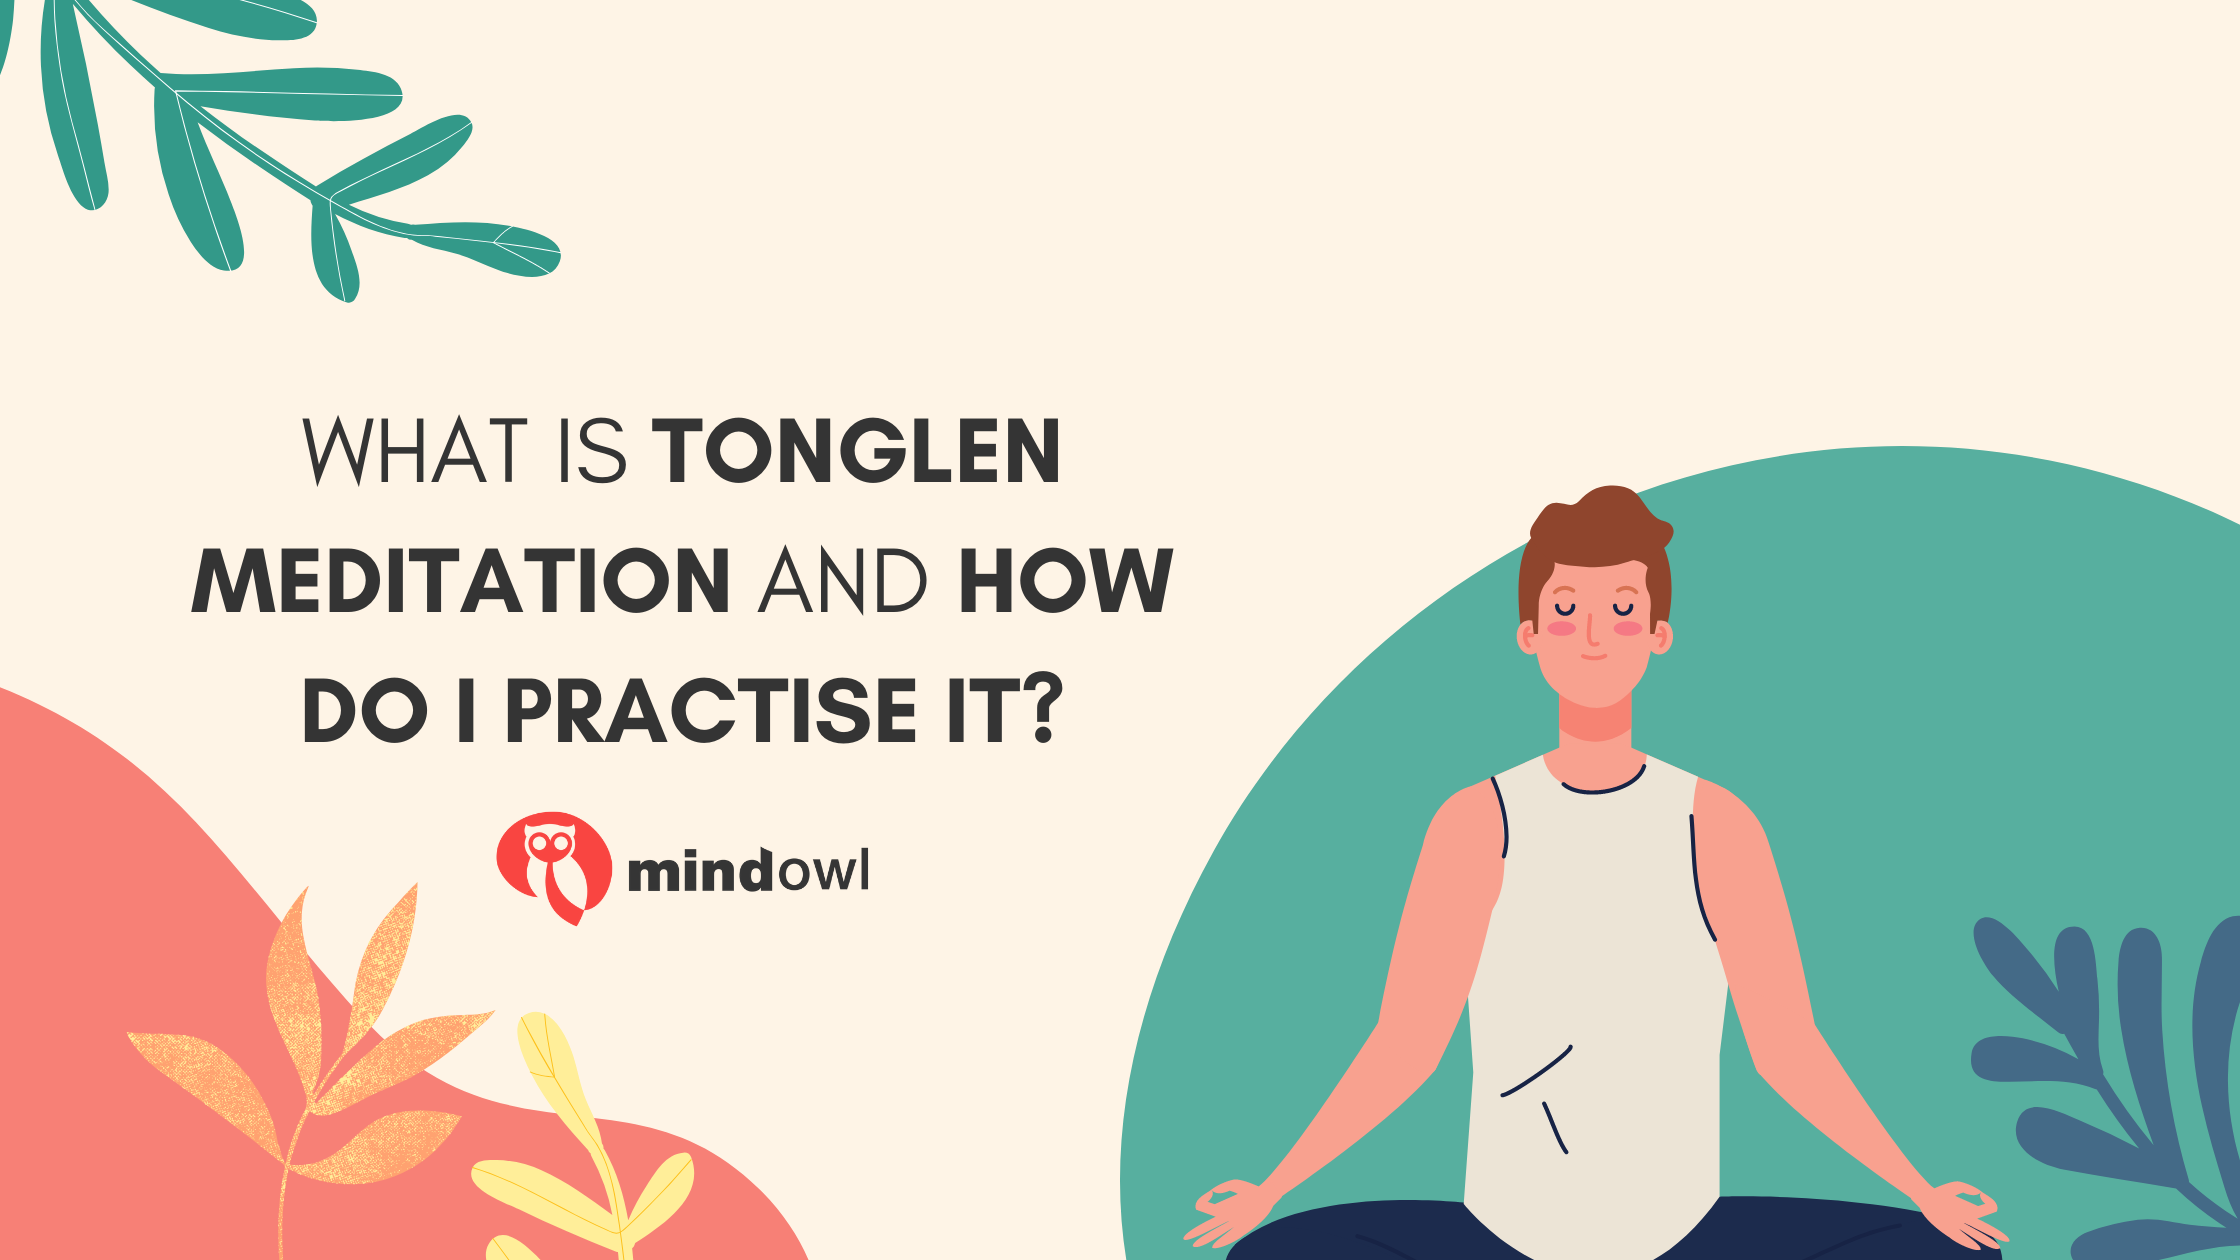 What is Tonglen meditation and how do I practise it?